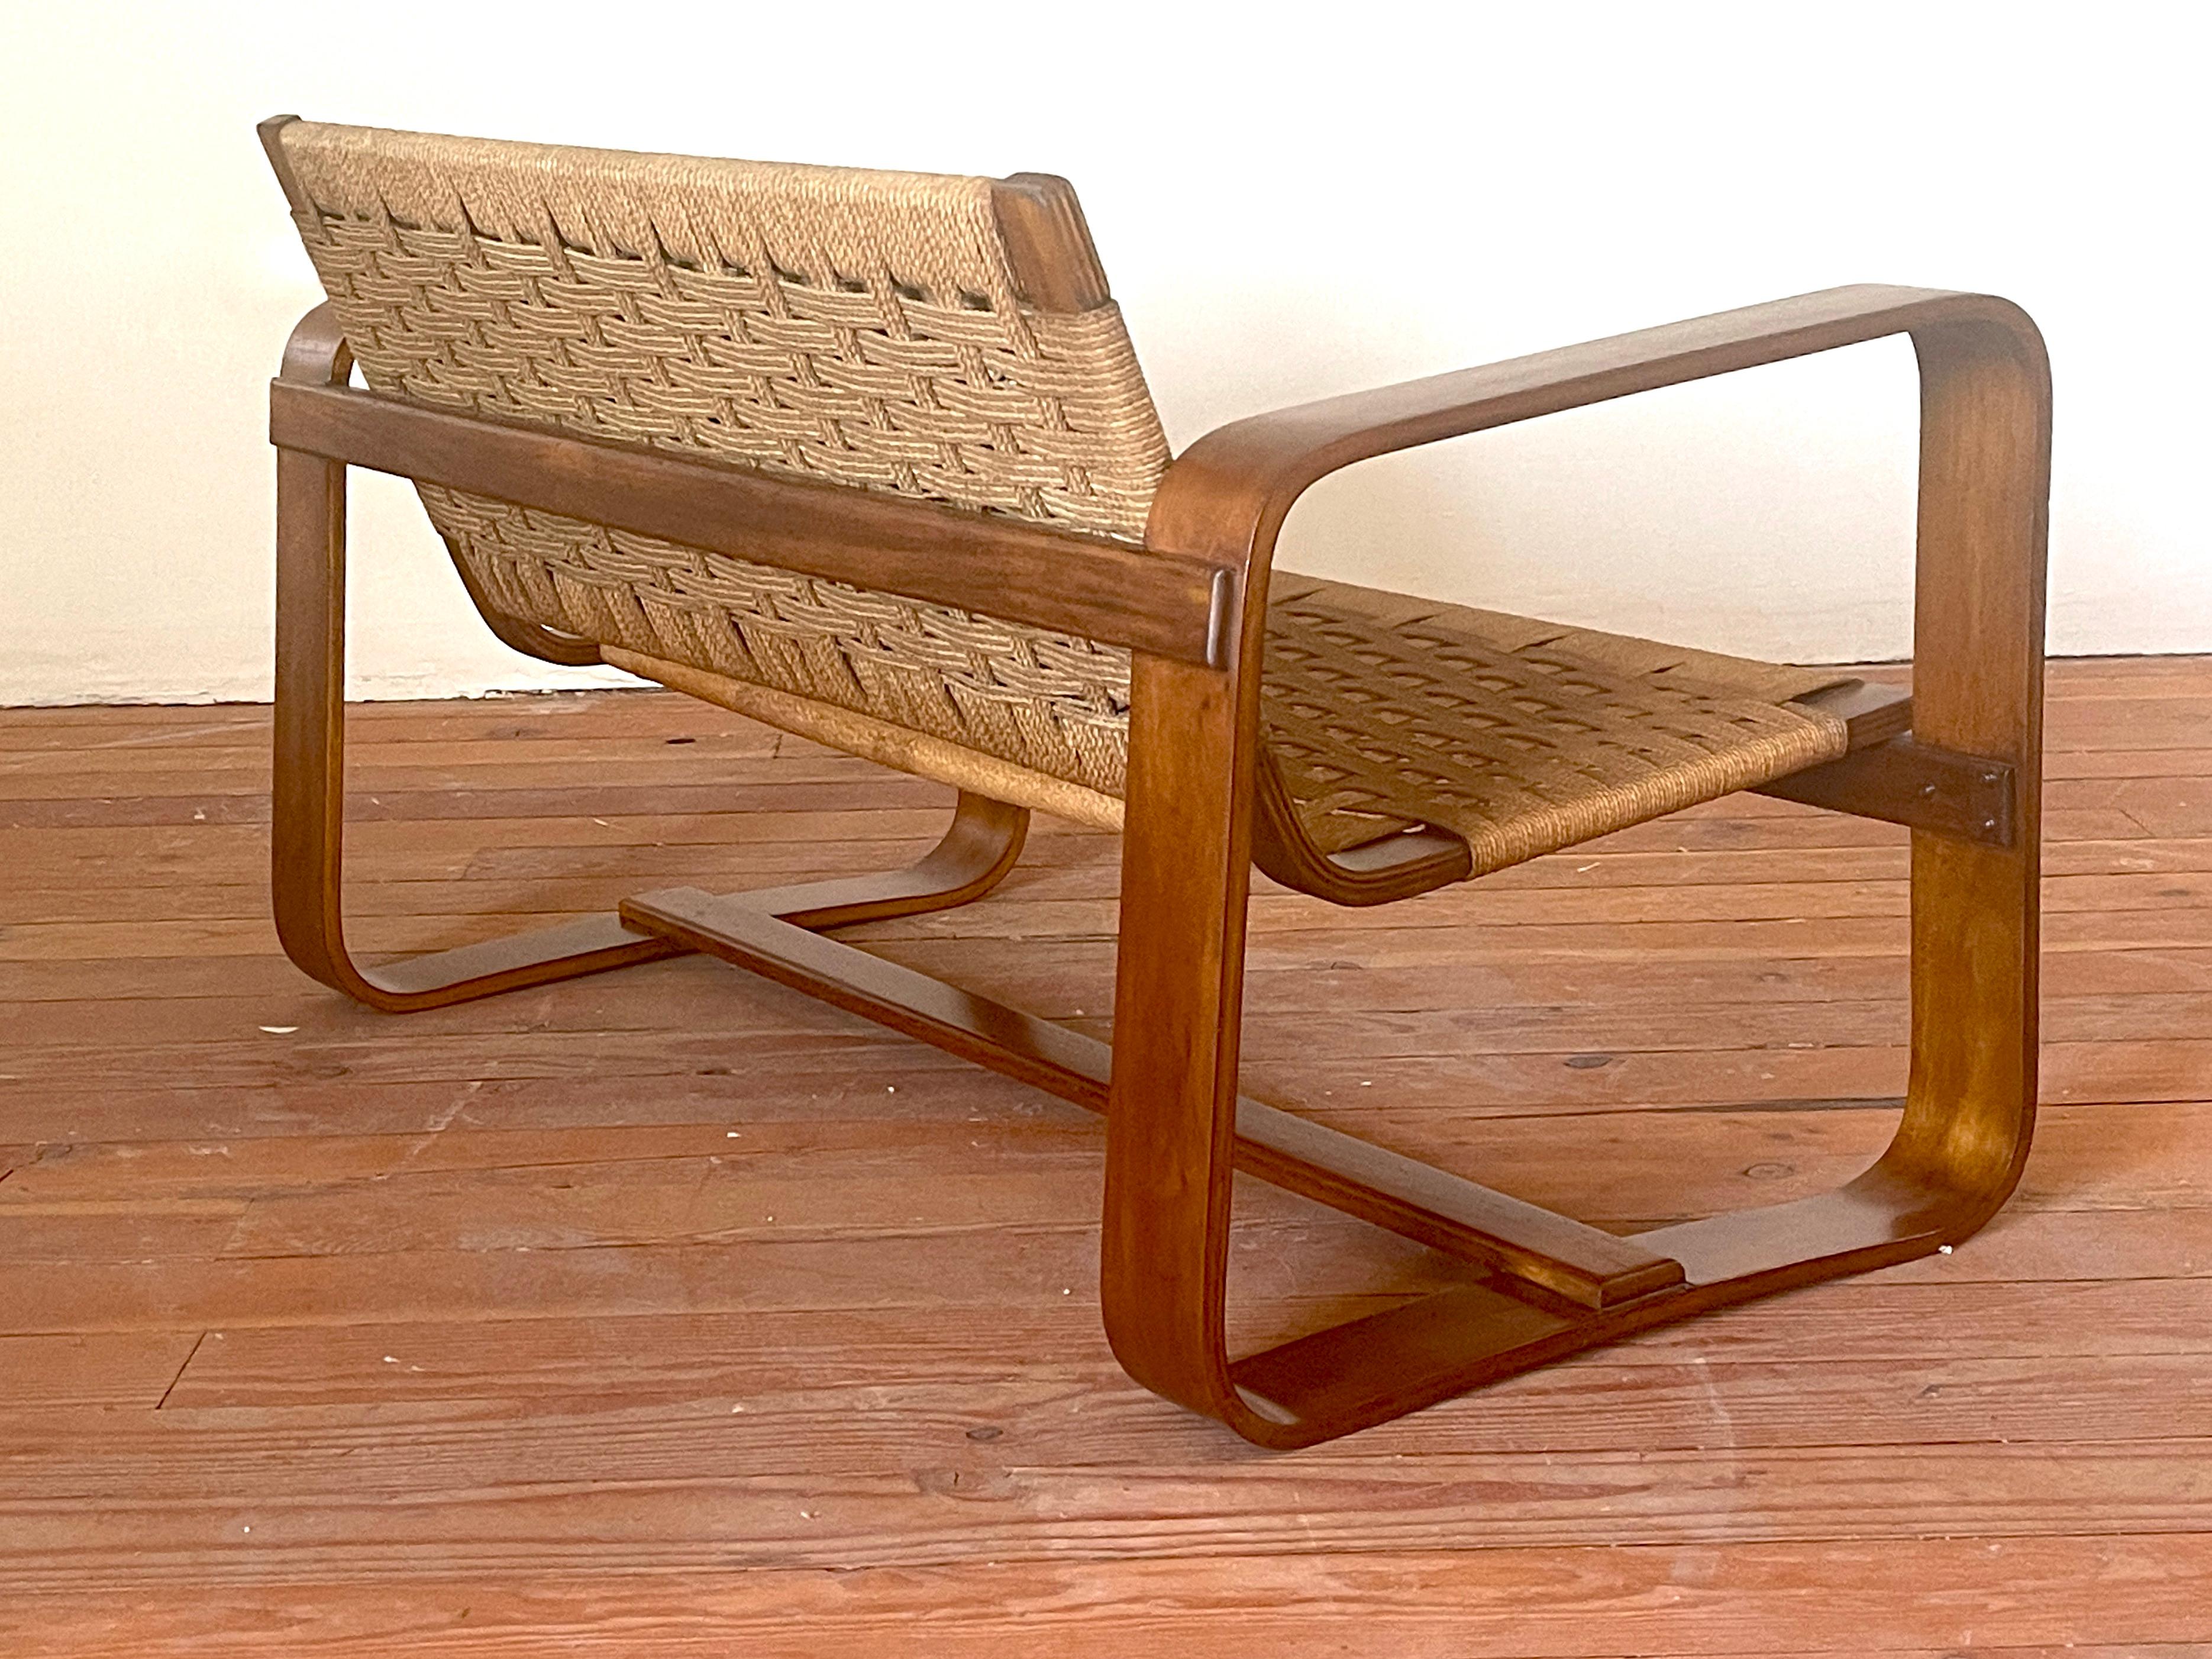 Guiseppe Pagano Pogatschnig Bench, 1939 For Sale 8